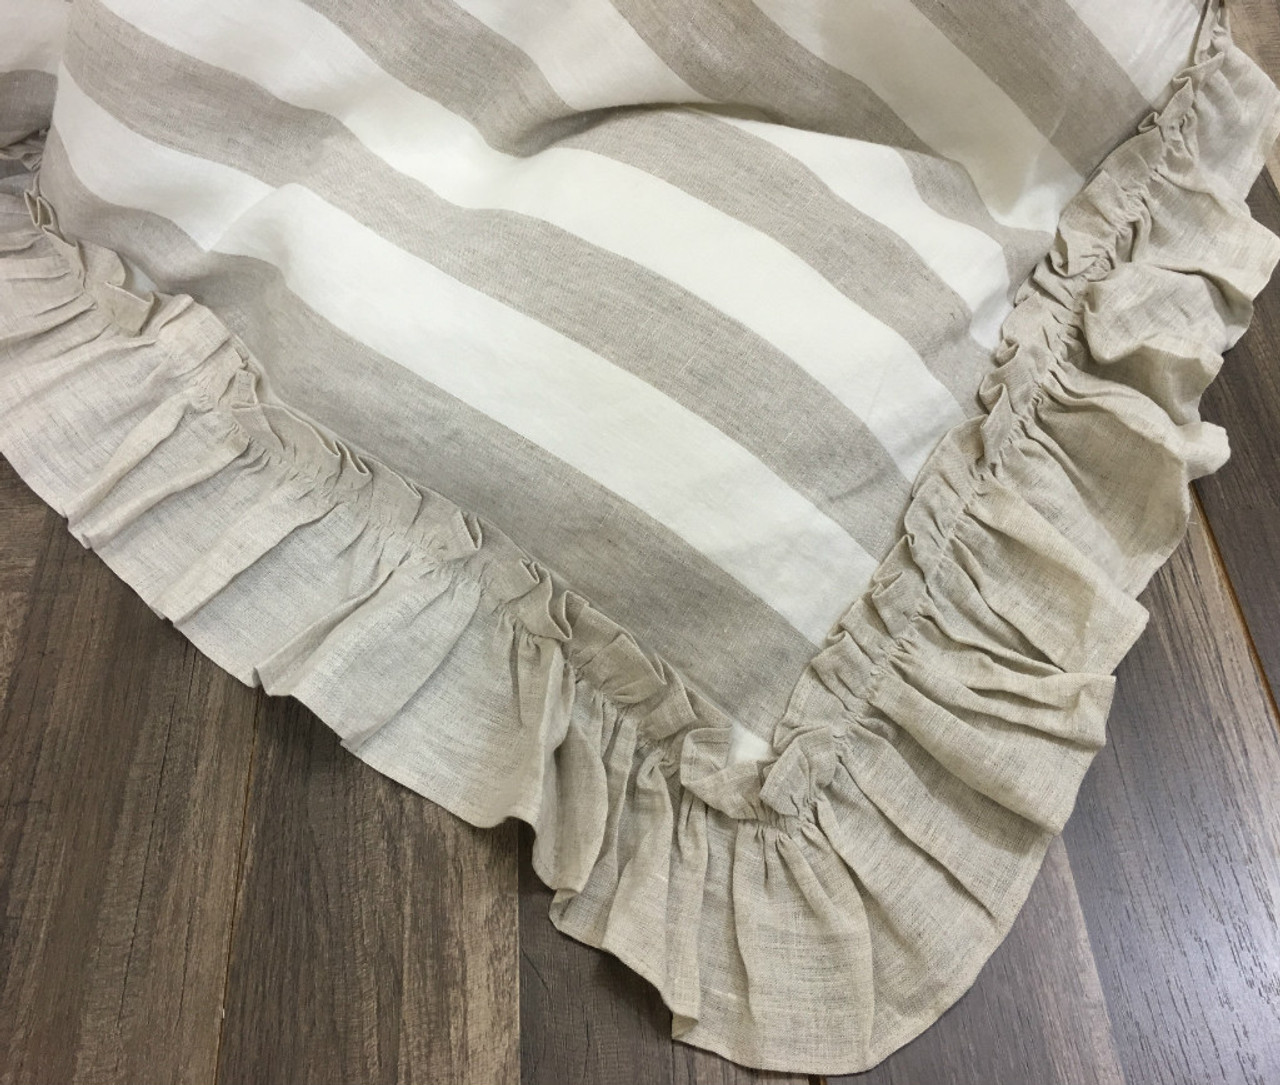 Linen Striped Duvet Cover Features Vintage Ruffles, Create your Style!